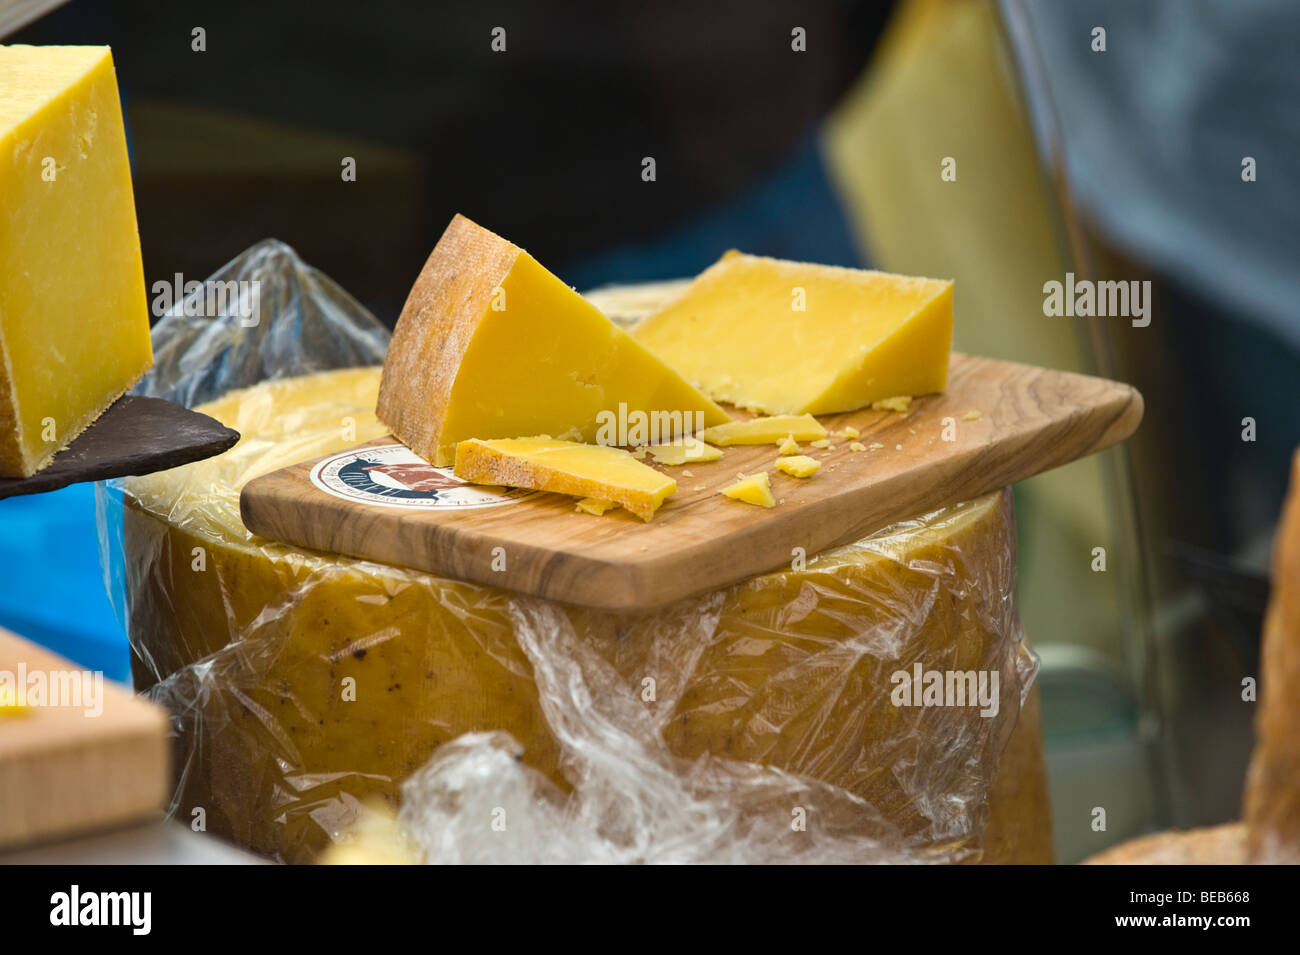 Cheesemakers display their products at the annual Great British Cheese